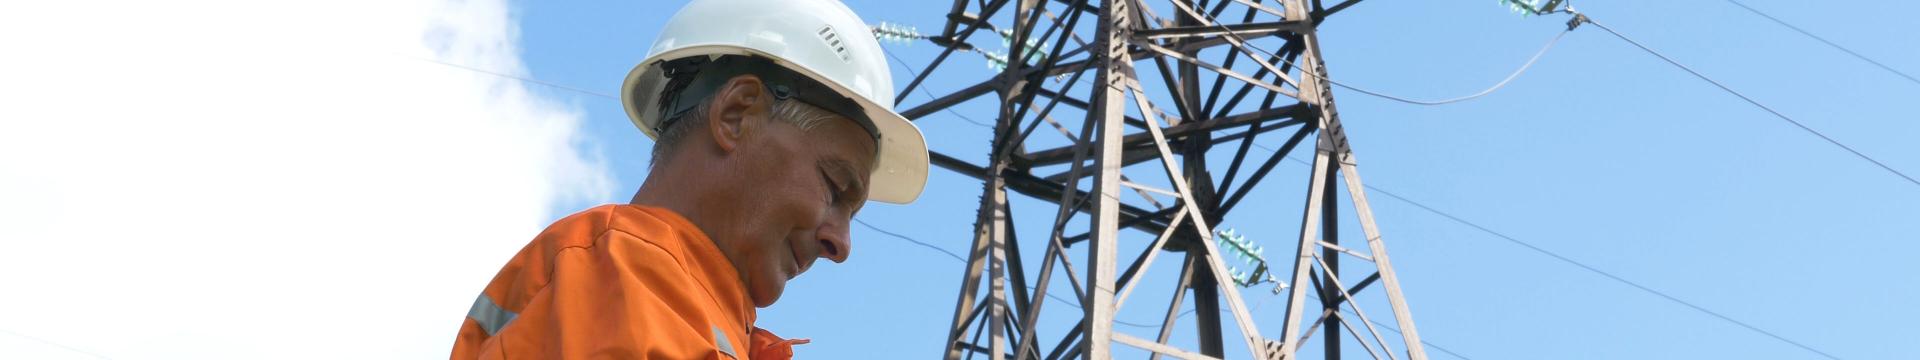 construction worker with power pylon behind him